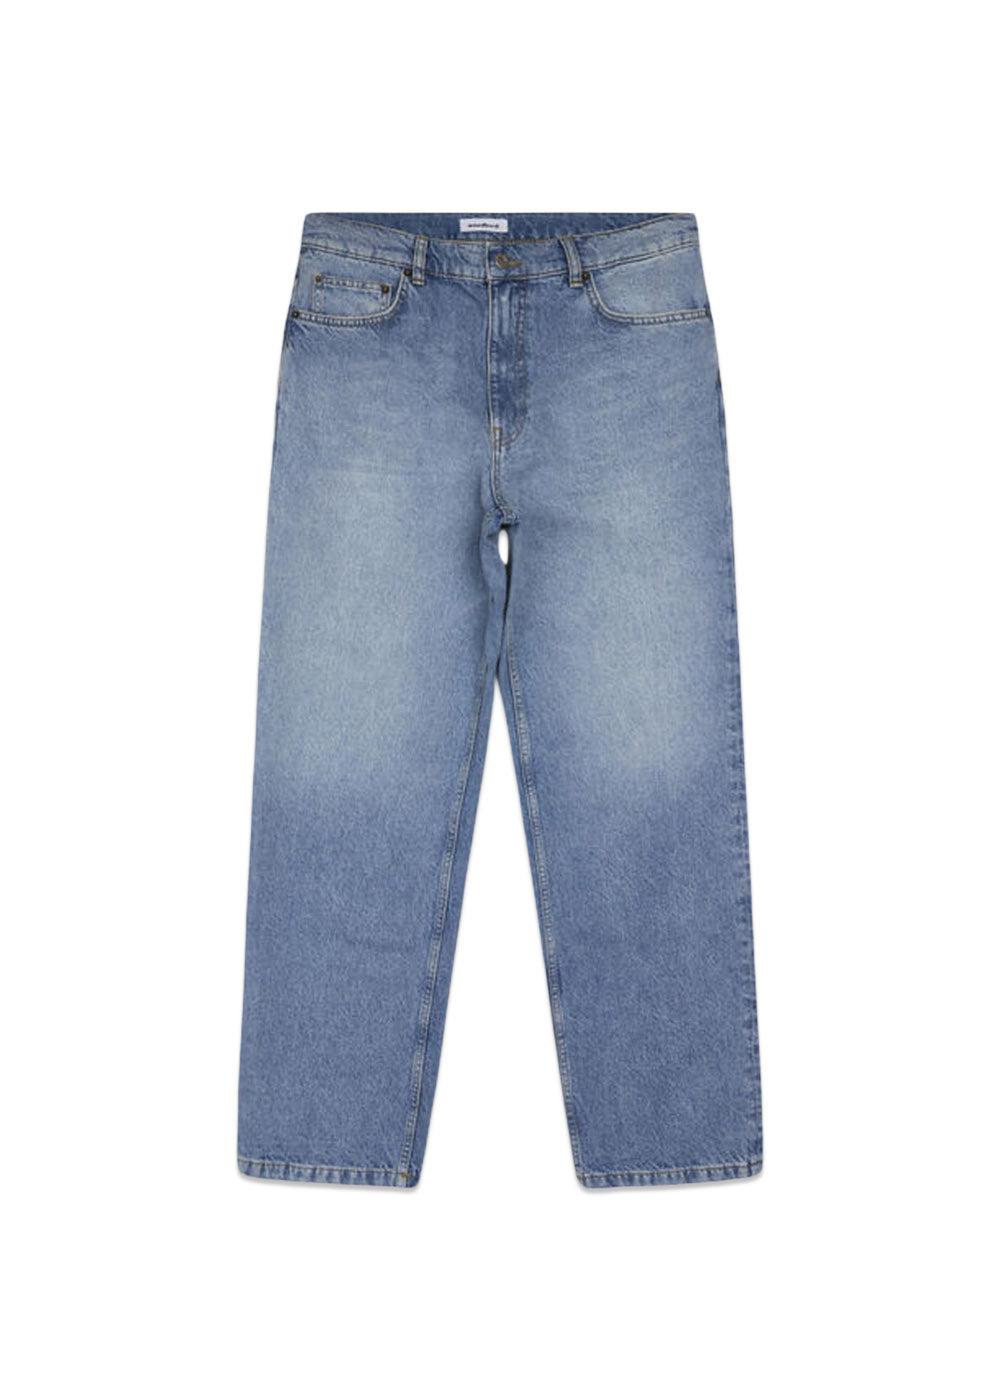 Woodbirds Rami Store Jeans - Authentic Blue. Køb jeans her.